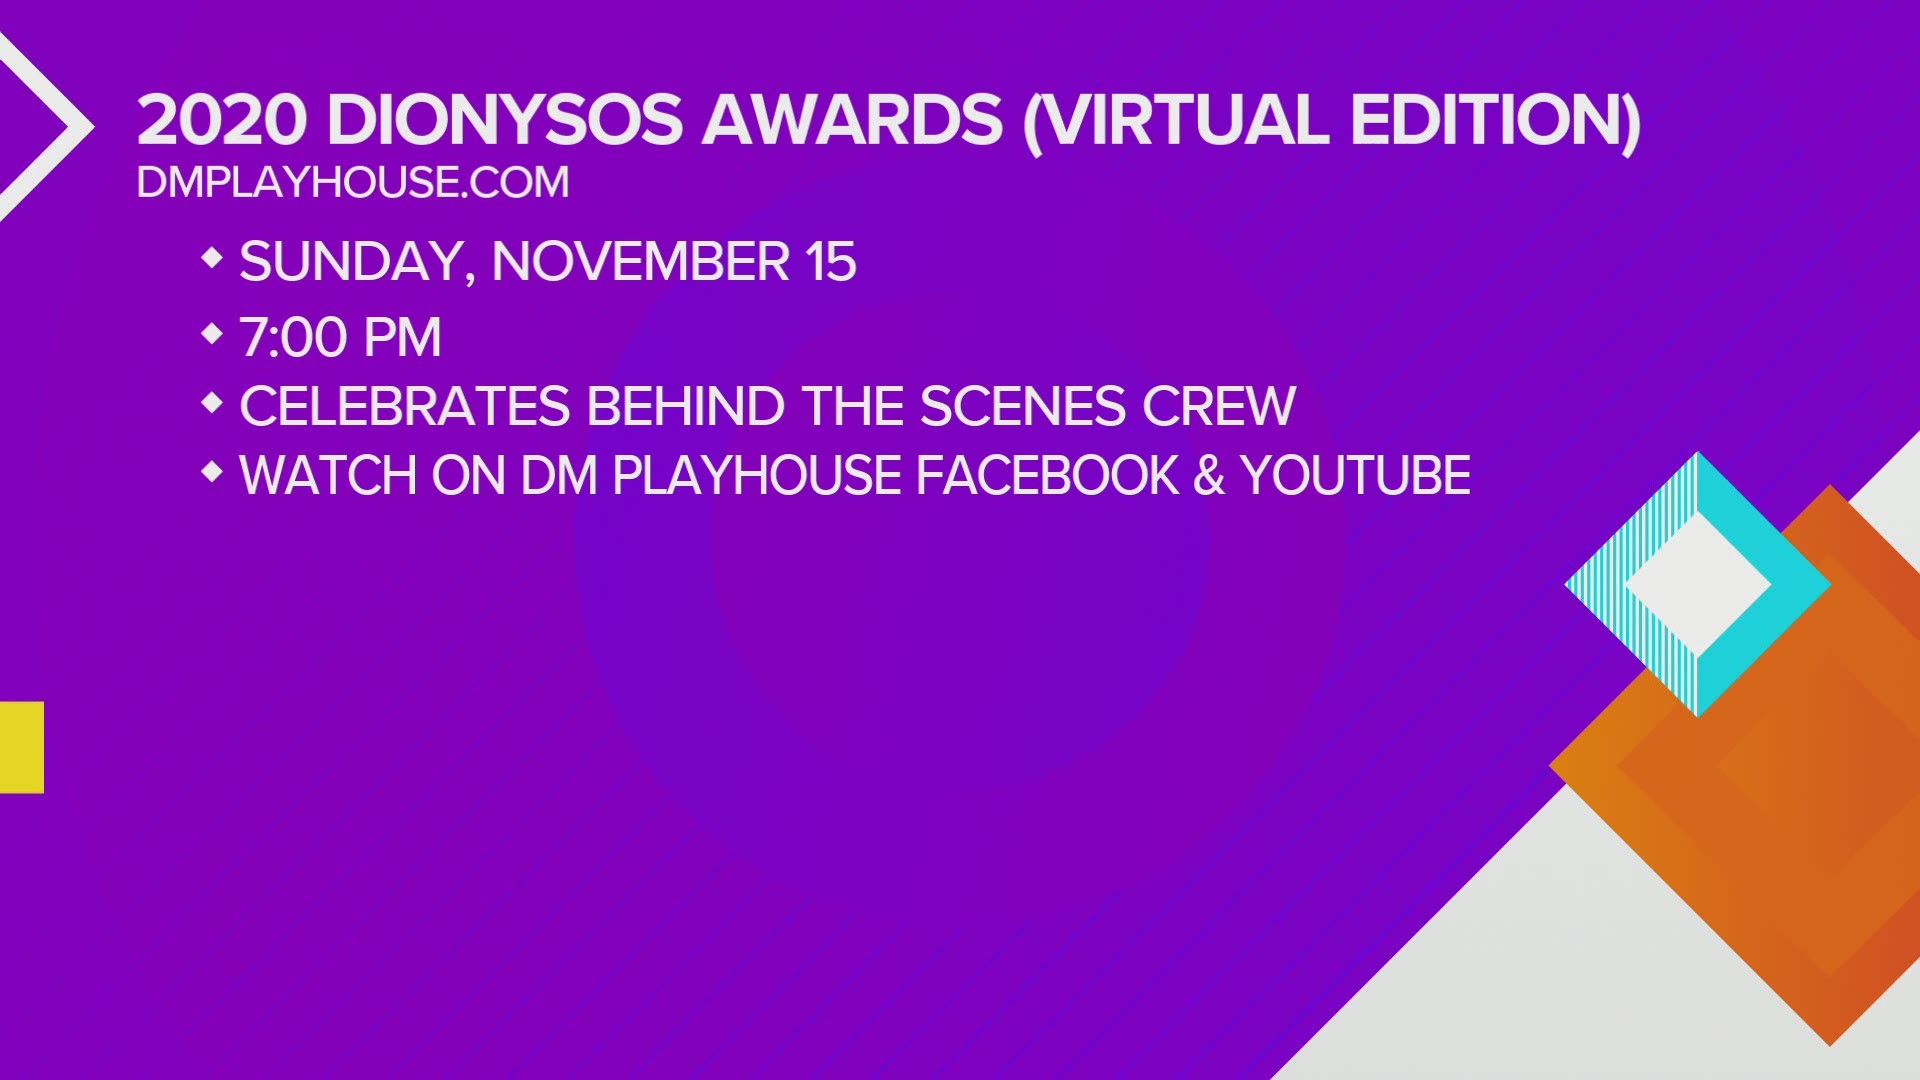 The Virtual Dionysos Awards are this weekend at the Des Moines Playhouse